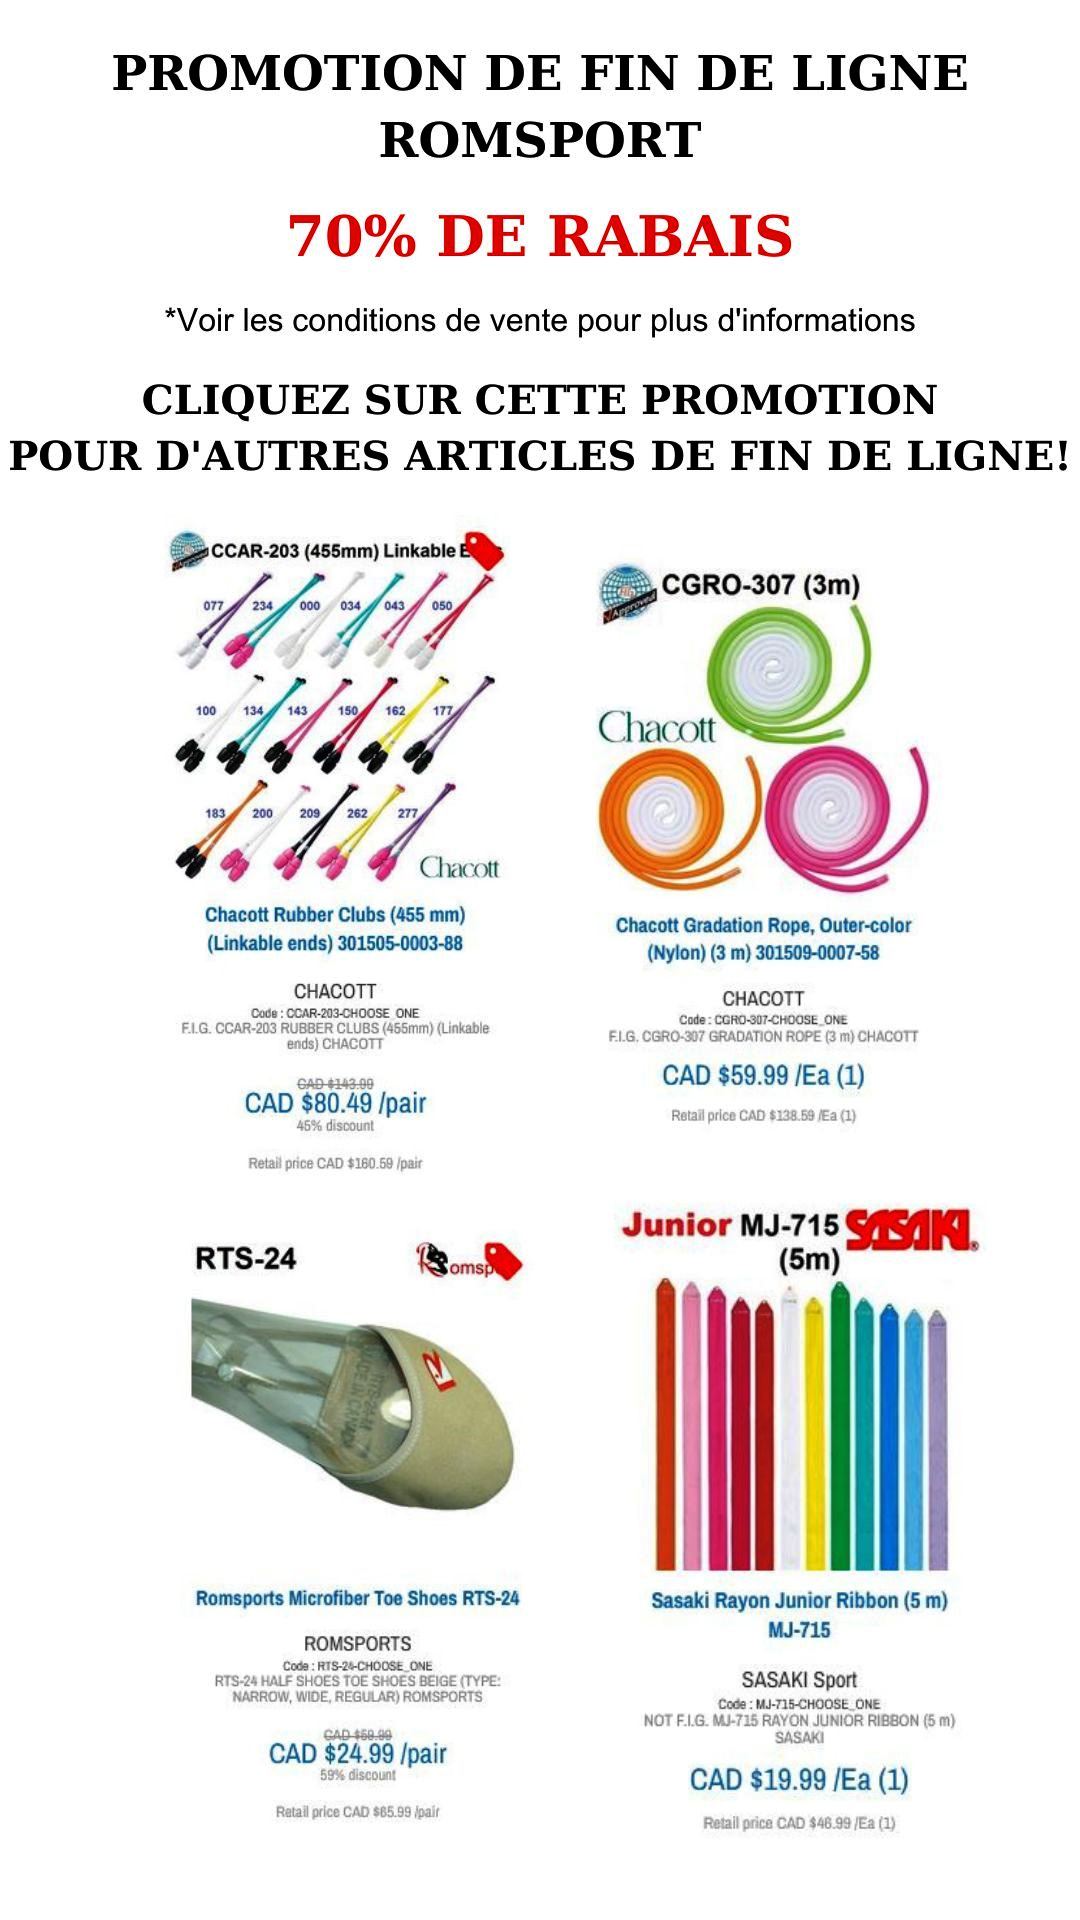 ROMSPORTS END OF LINE PROMOTIONfr 240419